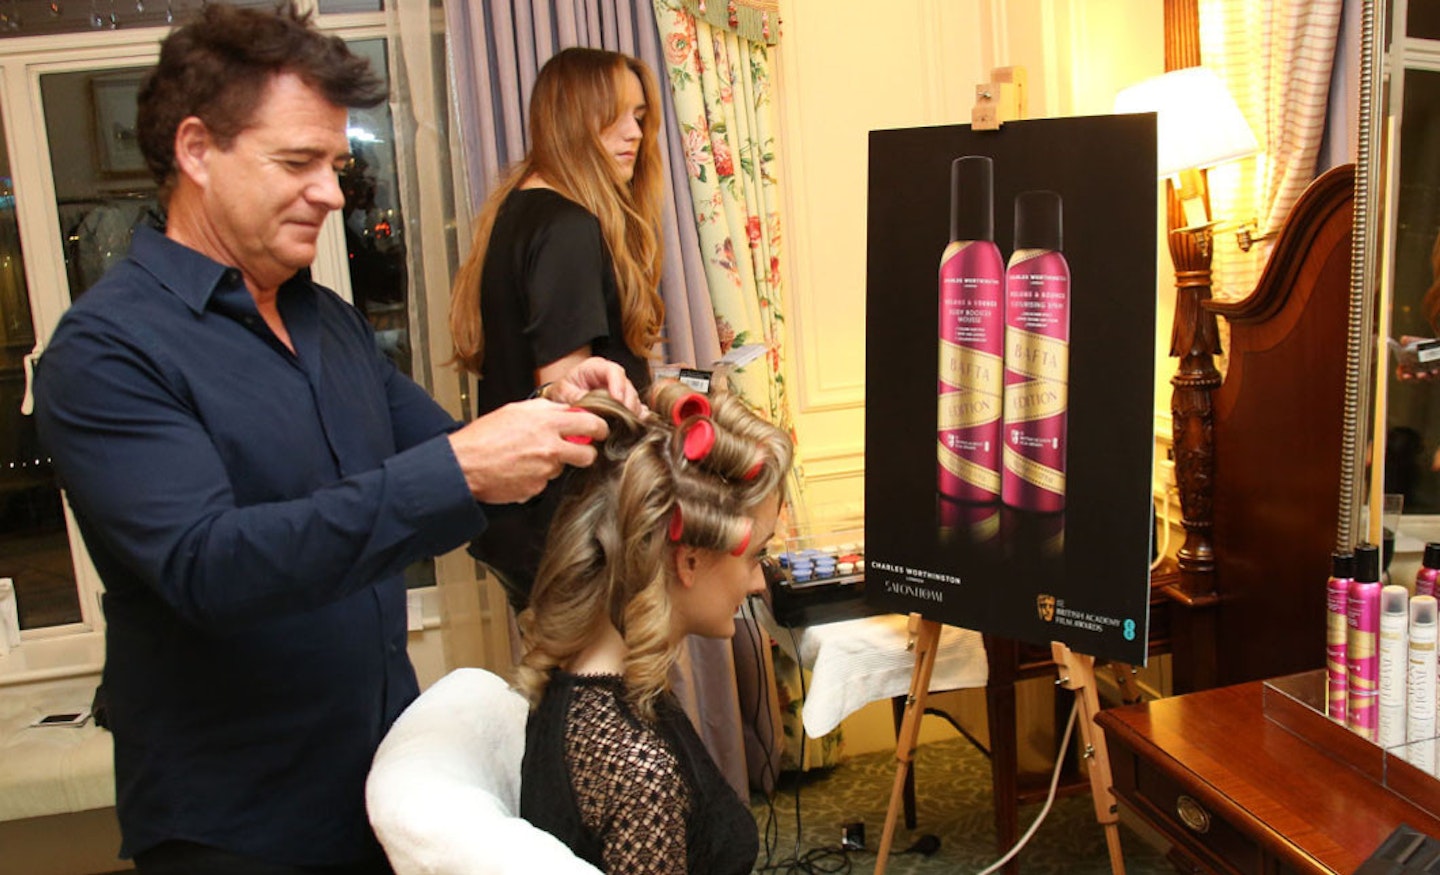 Charles doing Team Grazia's hair at The Savoy